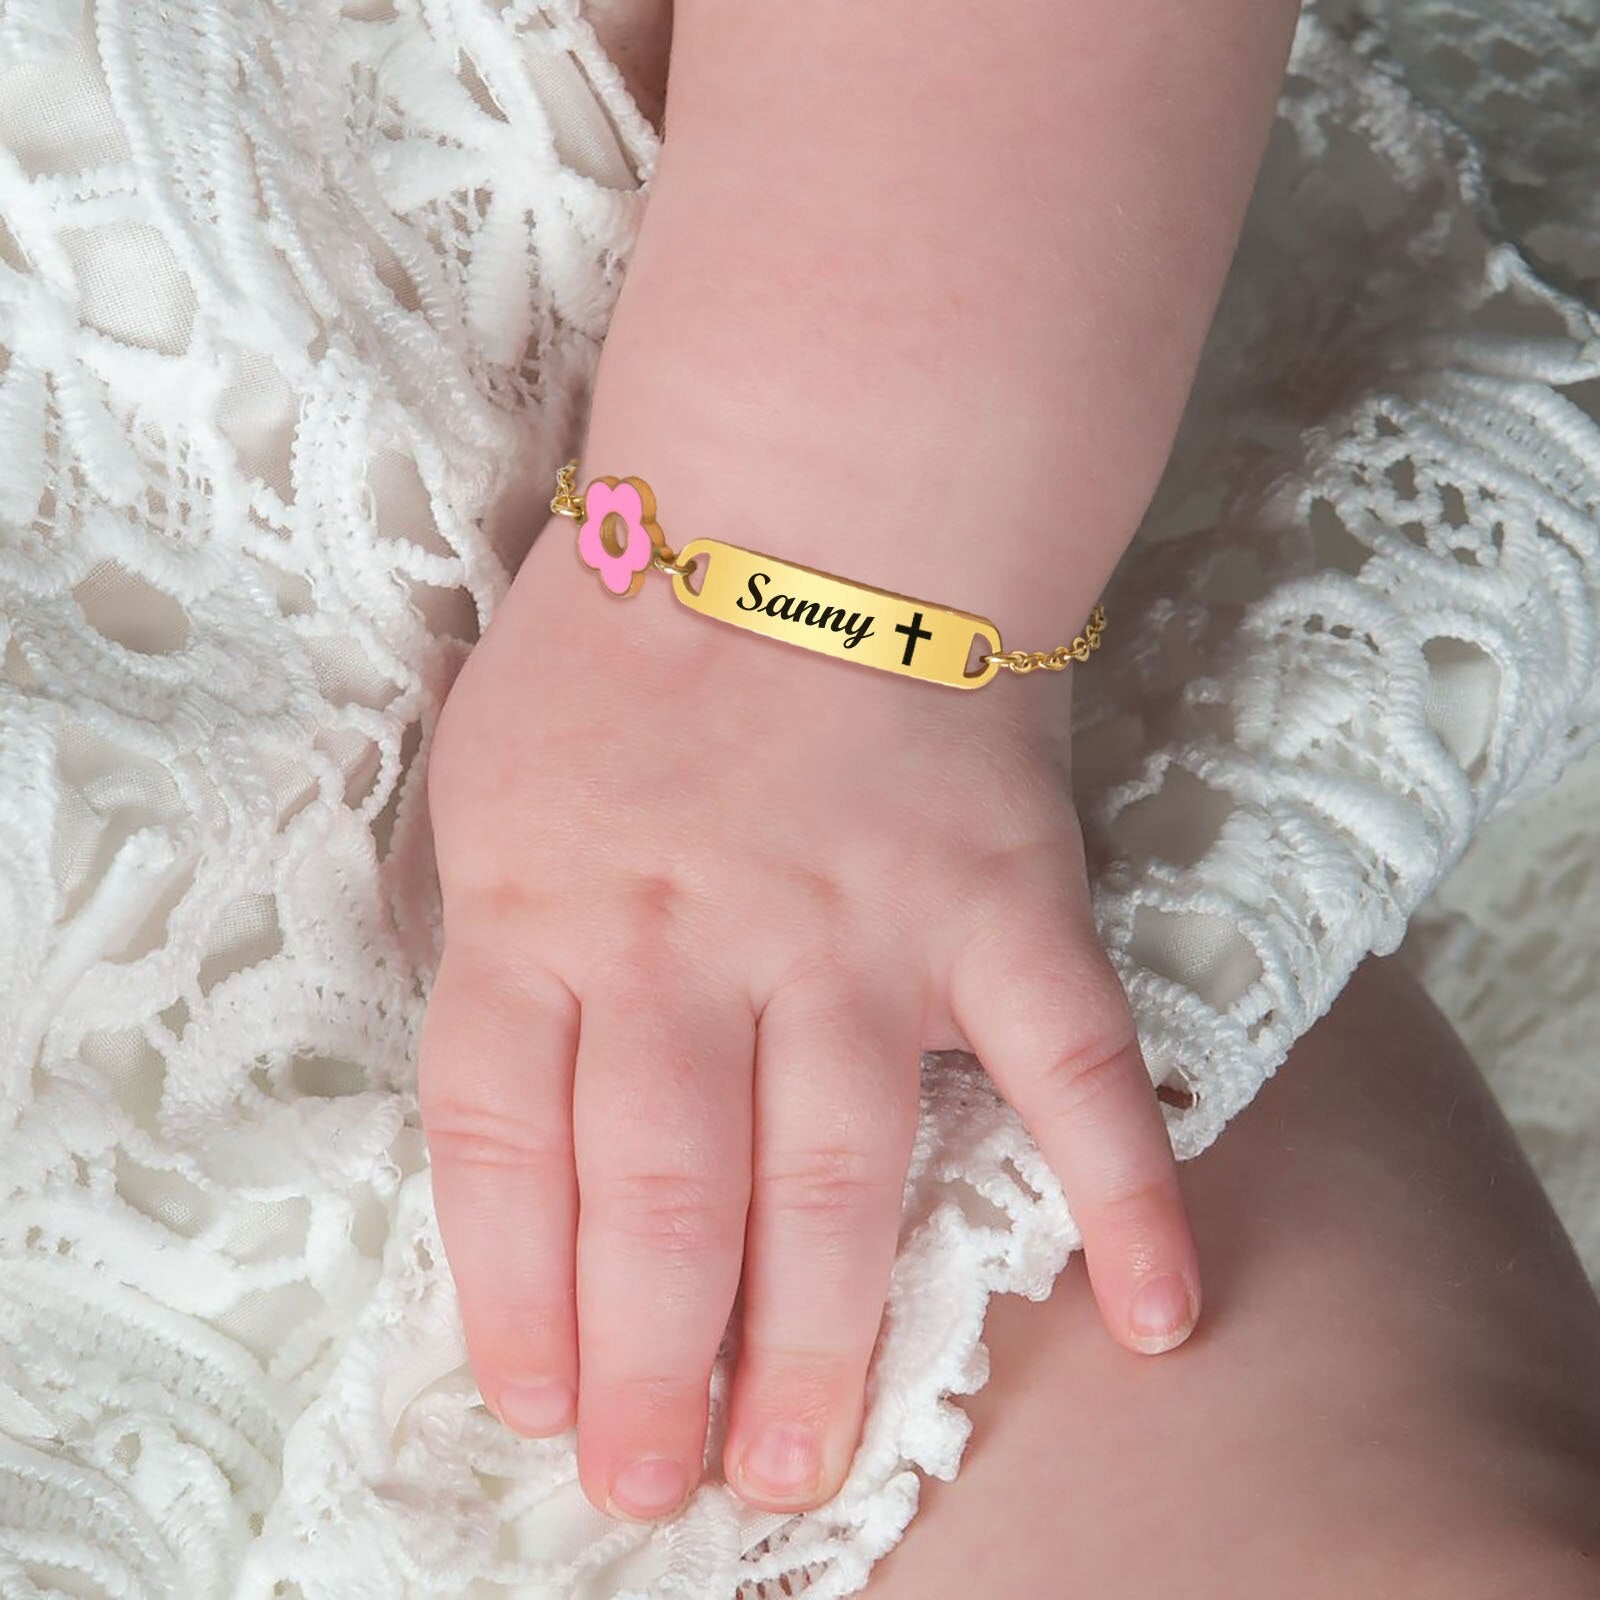 Cherish Every Moment: Personalized Baby Name Bracelet with Cute Flower Detail - Ideal Gift for Girls and Boys on Birthdays!